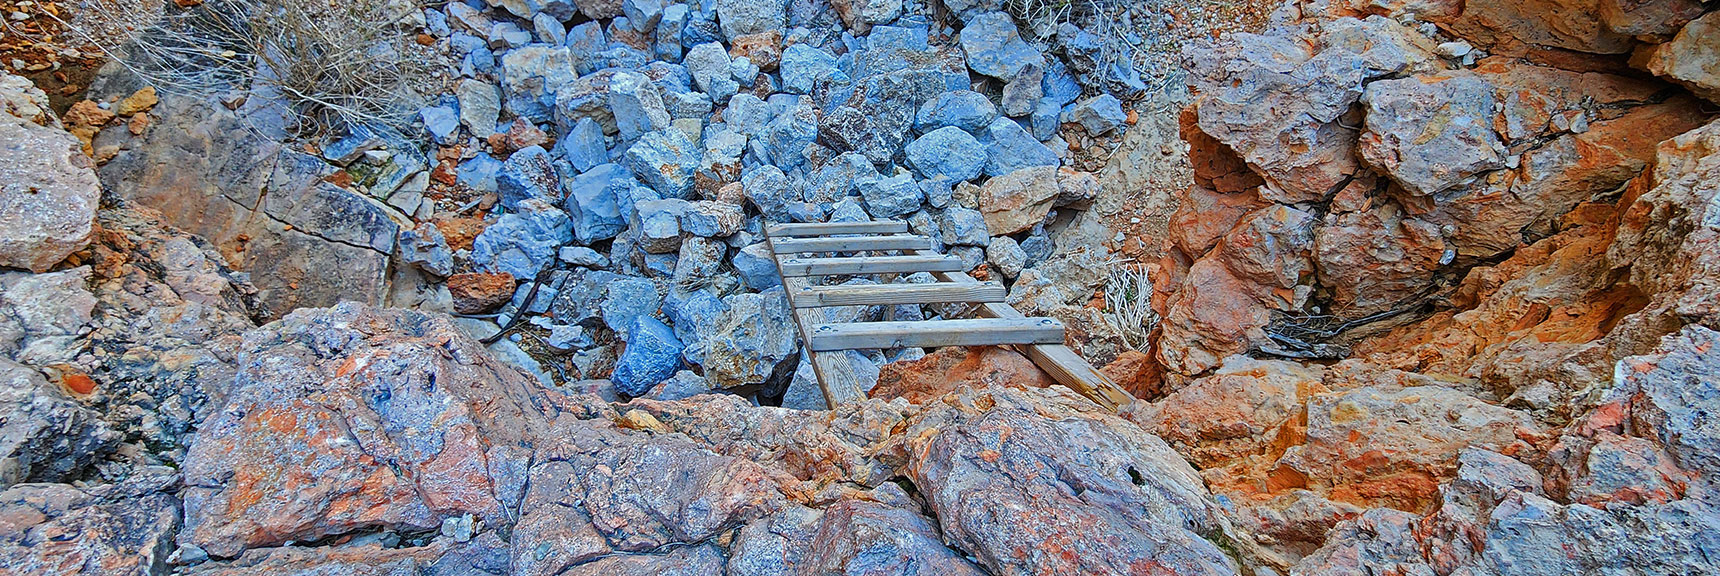 Venture Over the Edge of the Dry Fall Barrier Aided by a Small Wooden Ladder. | Fossil Canyon | Cowboy Canyon | Blue Diamond Hill, Nevada